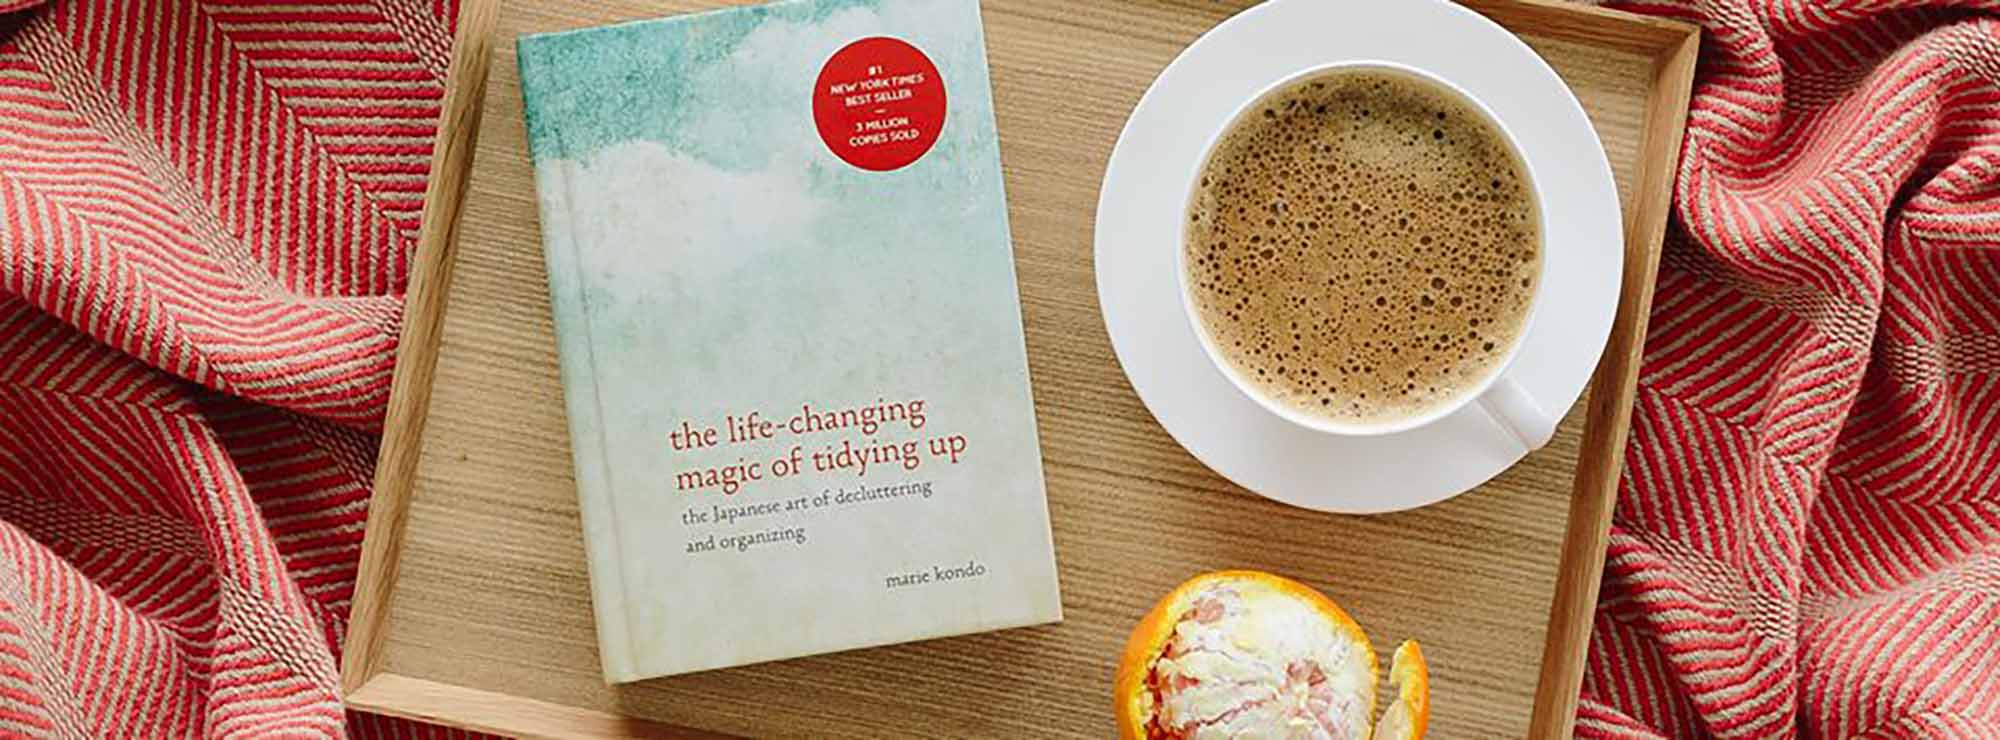 When the life is changing. Magic of Tidying. Marie Kondō – the Life-changing Magic of Tidying up. Life changing. The Japanese are tidy.